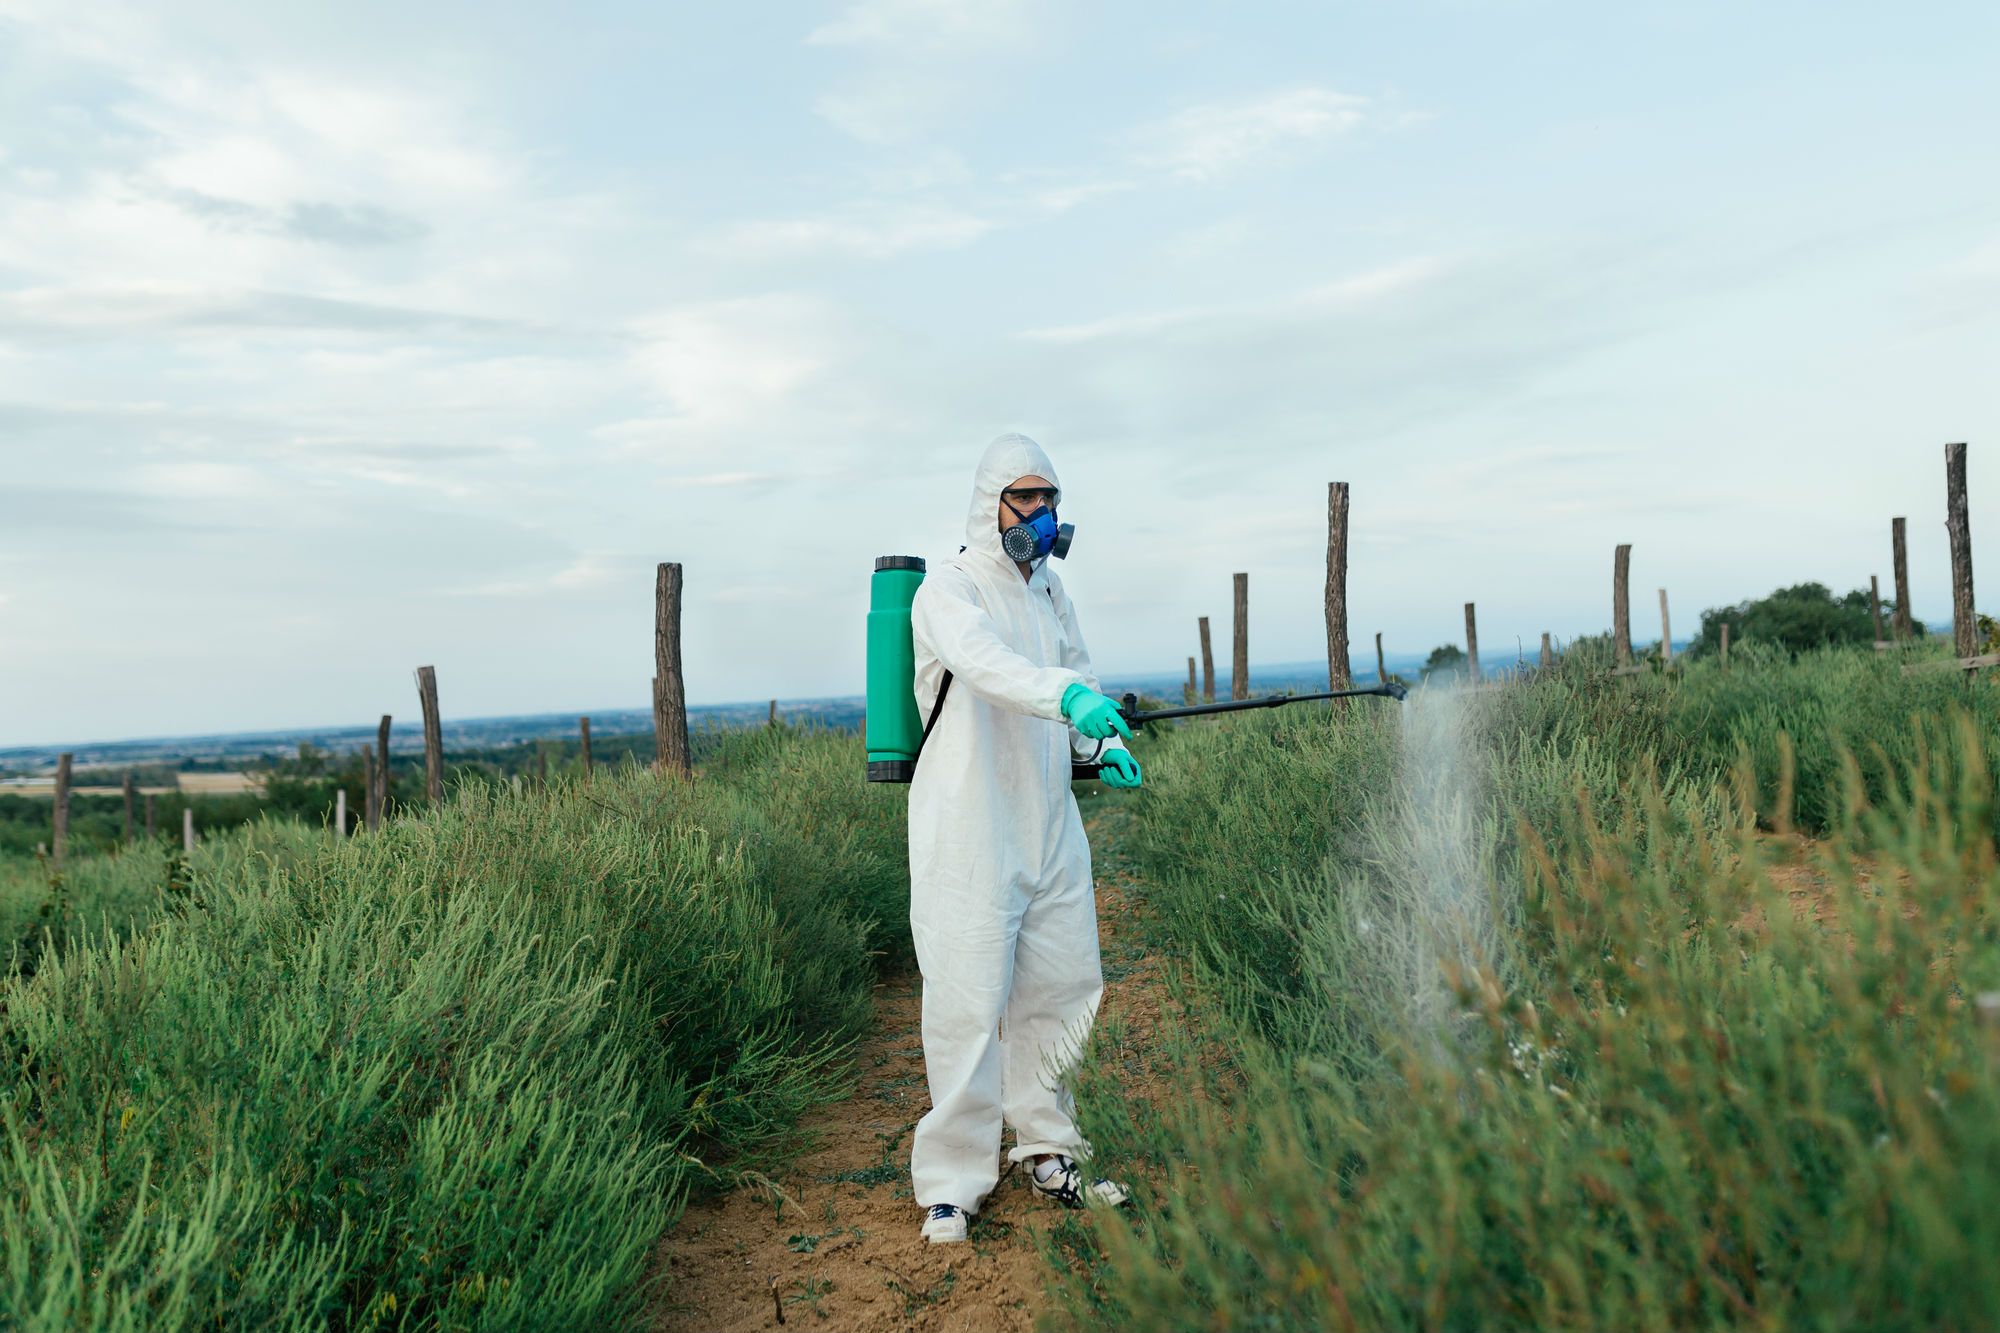 A man in a hazmat suit sprays plants with herbicide or pesticide - Roundup